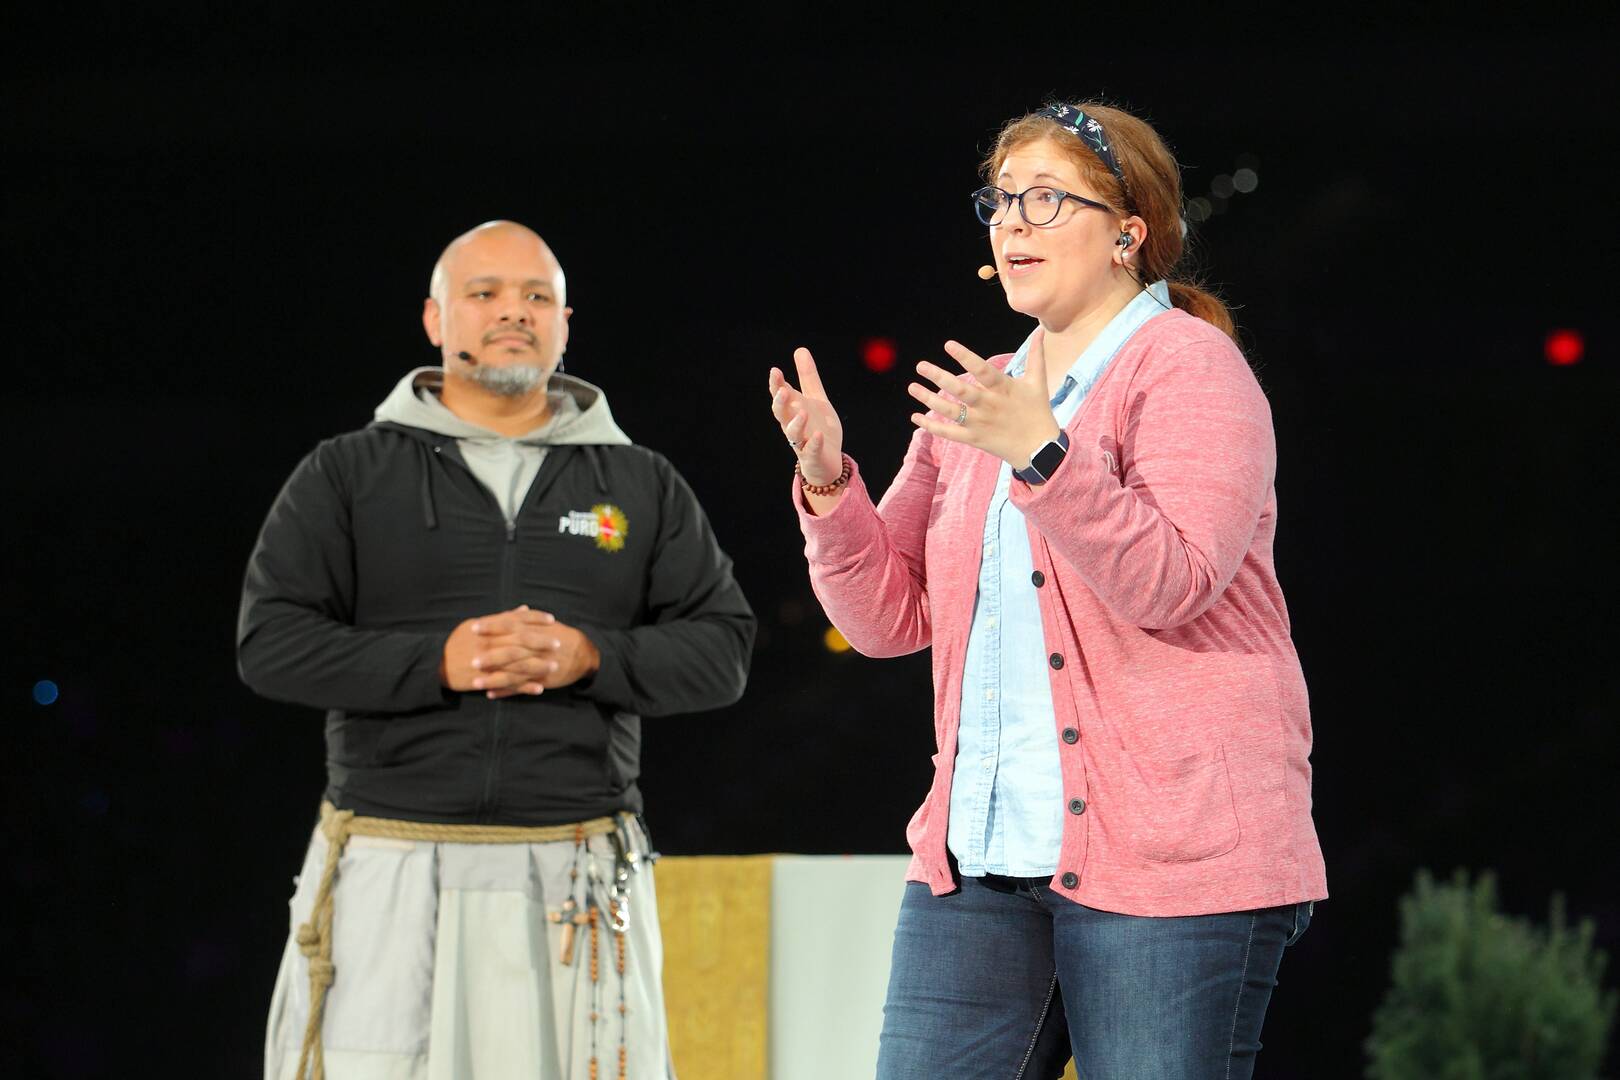 Agustino Torres, O.F.M., and Katie Prejean McGrady welcome attendees to the opening general session on Nov. 21, 2019, of the National Catholic Youth Conference in Indianapolis (CNS photo/Bob Nichols, Catholic Moment)